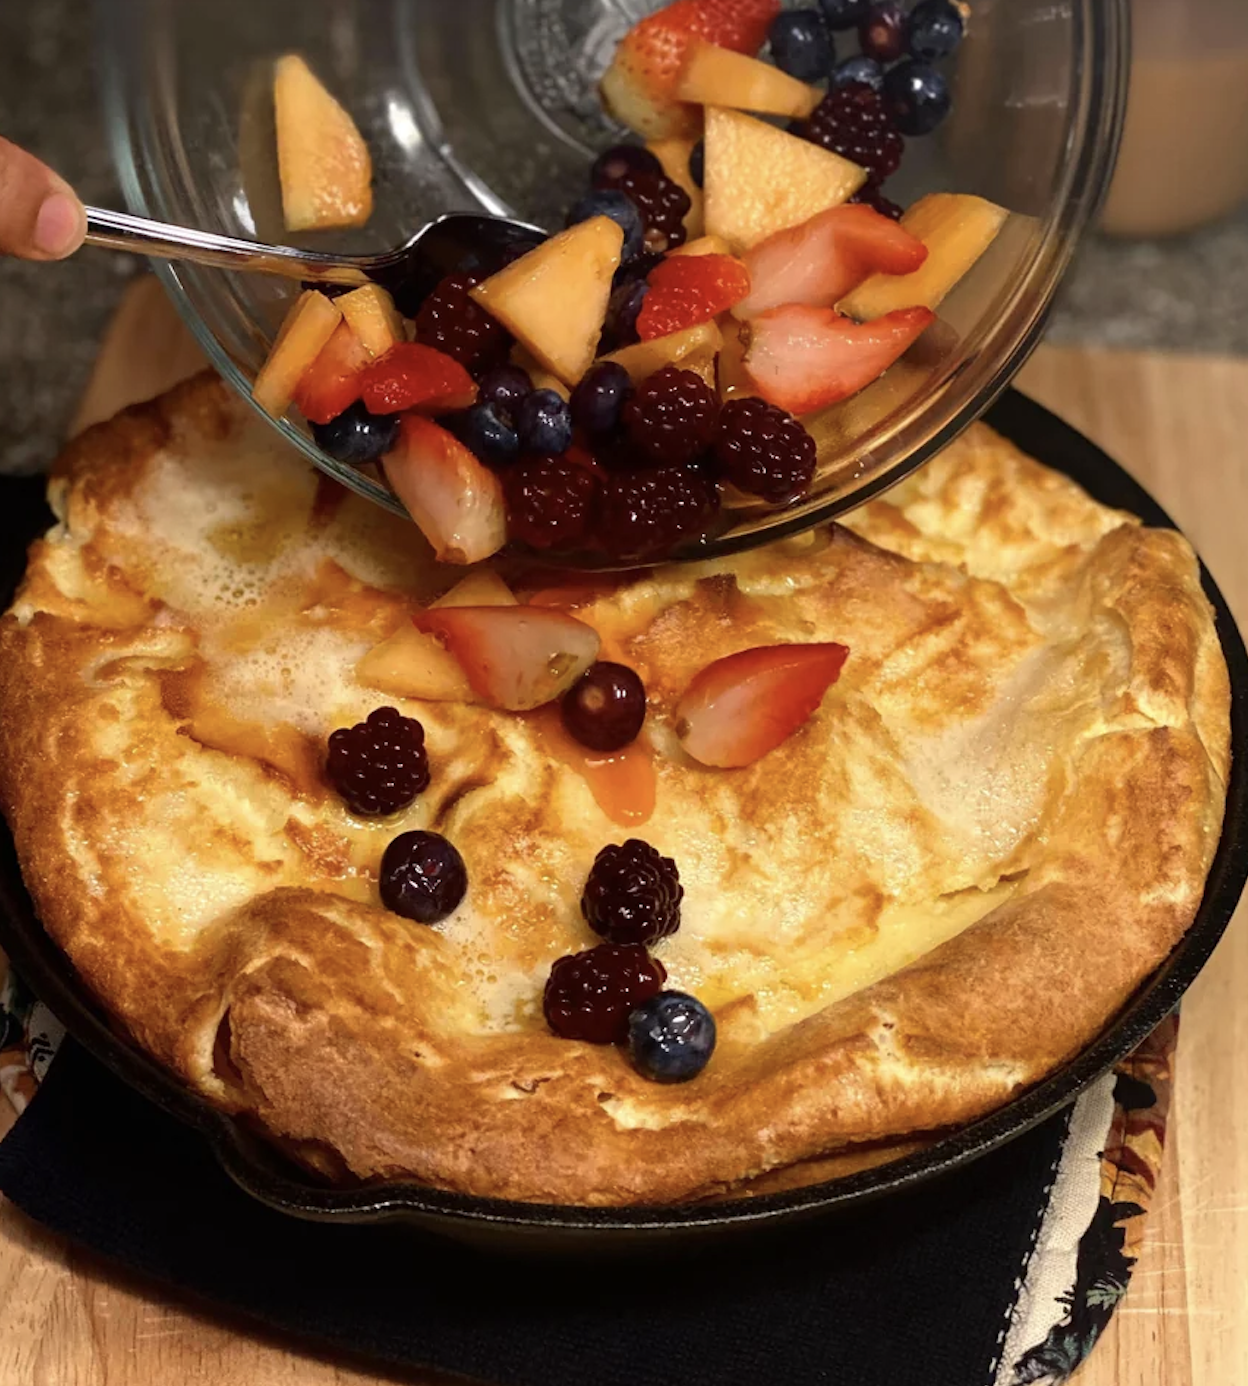 Puffed golden-brown pancake in skillet topped with assorted fresh berries and fruit slices